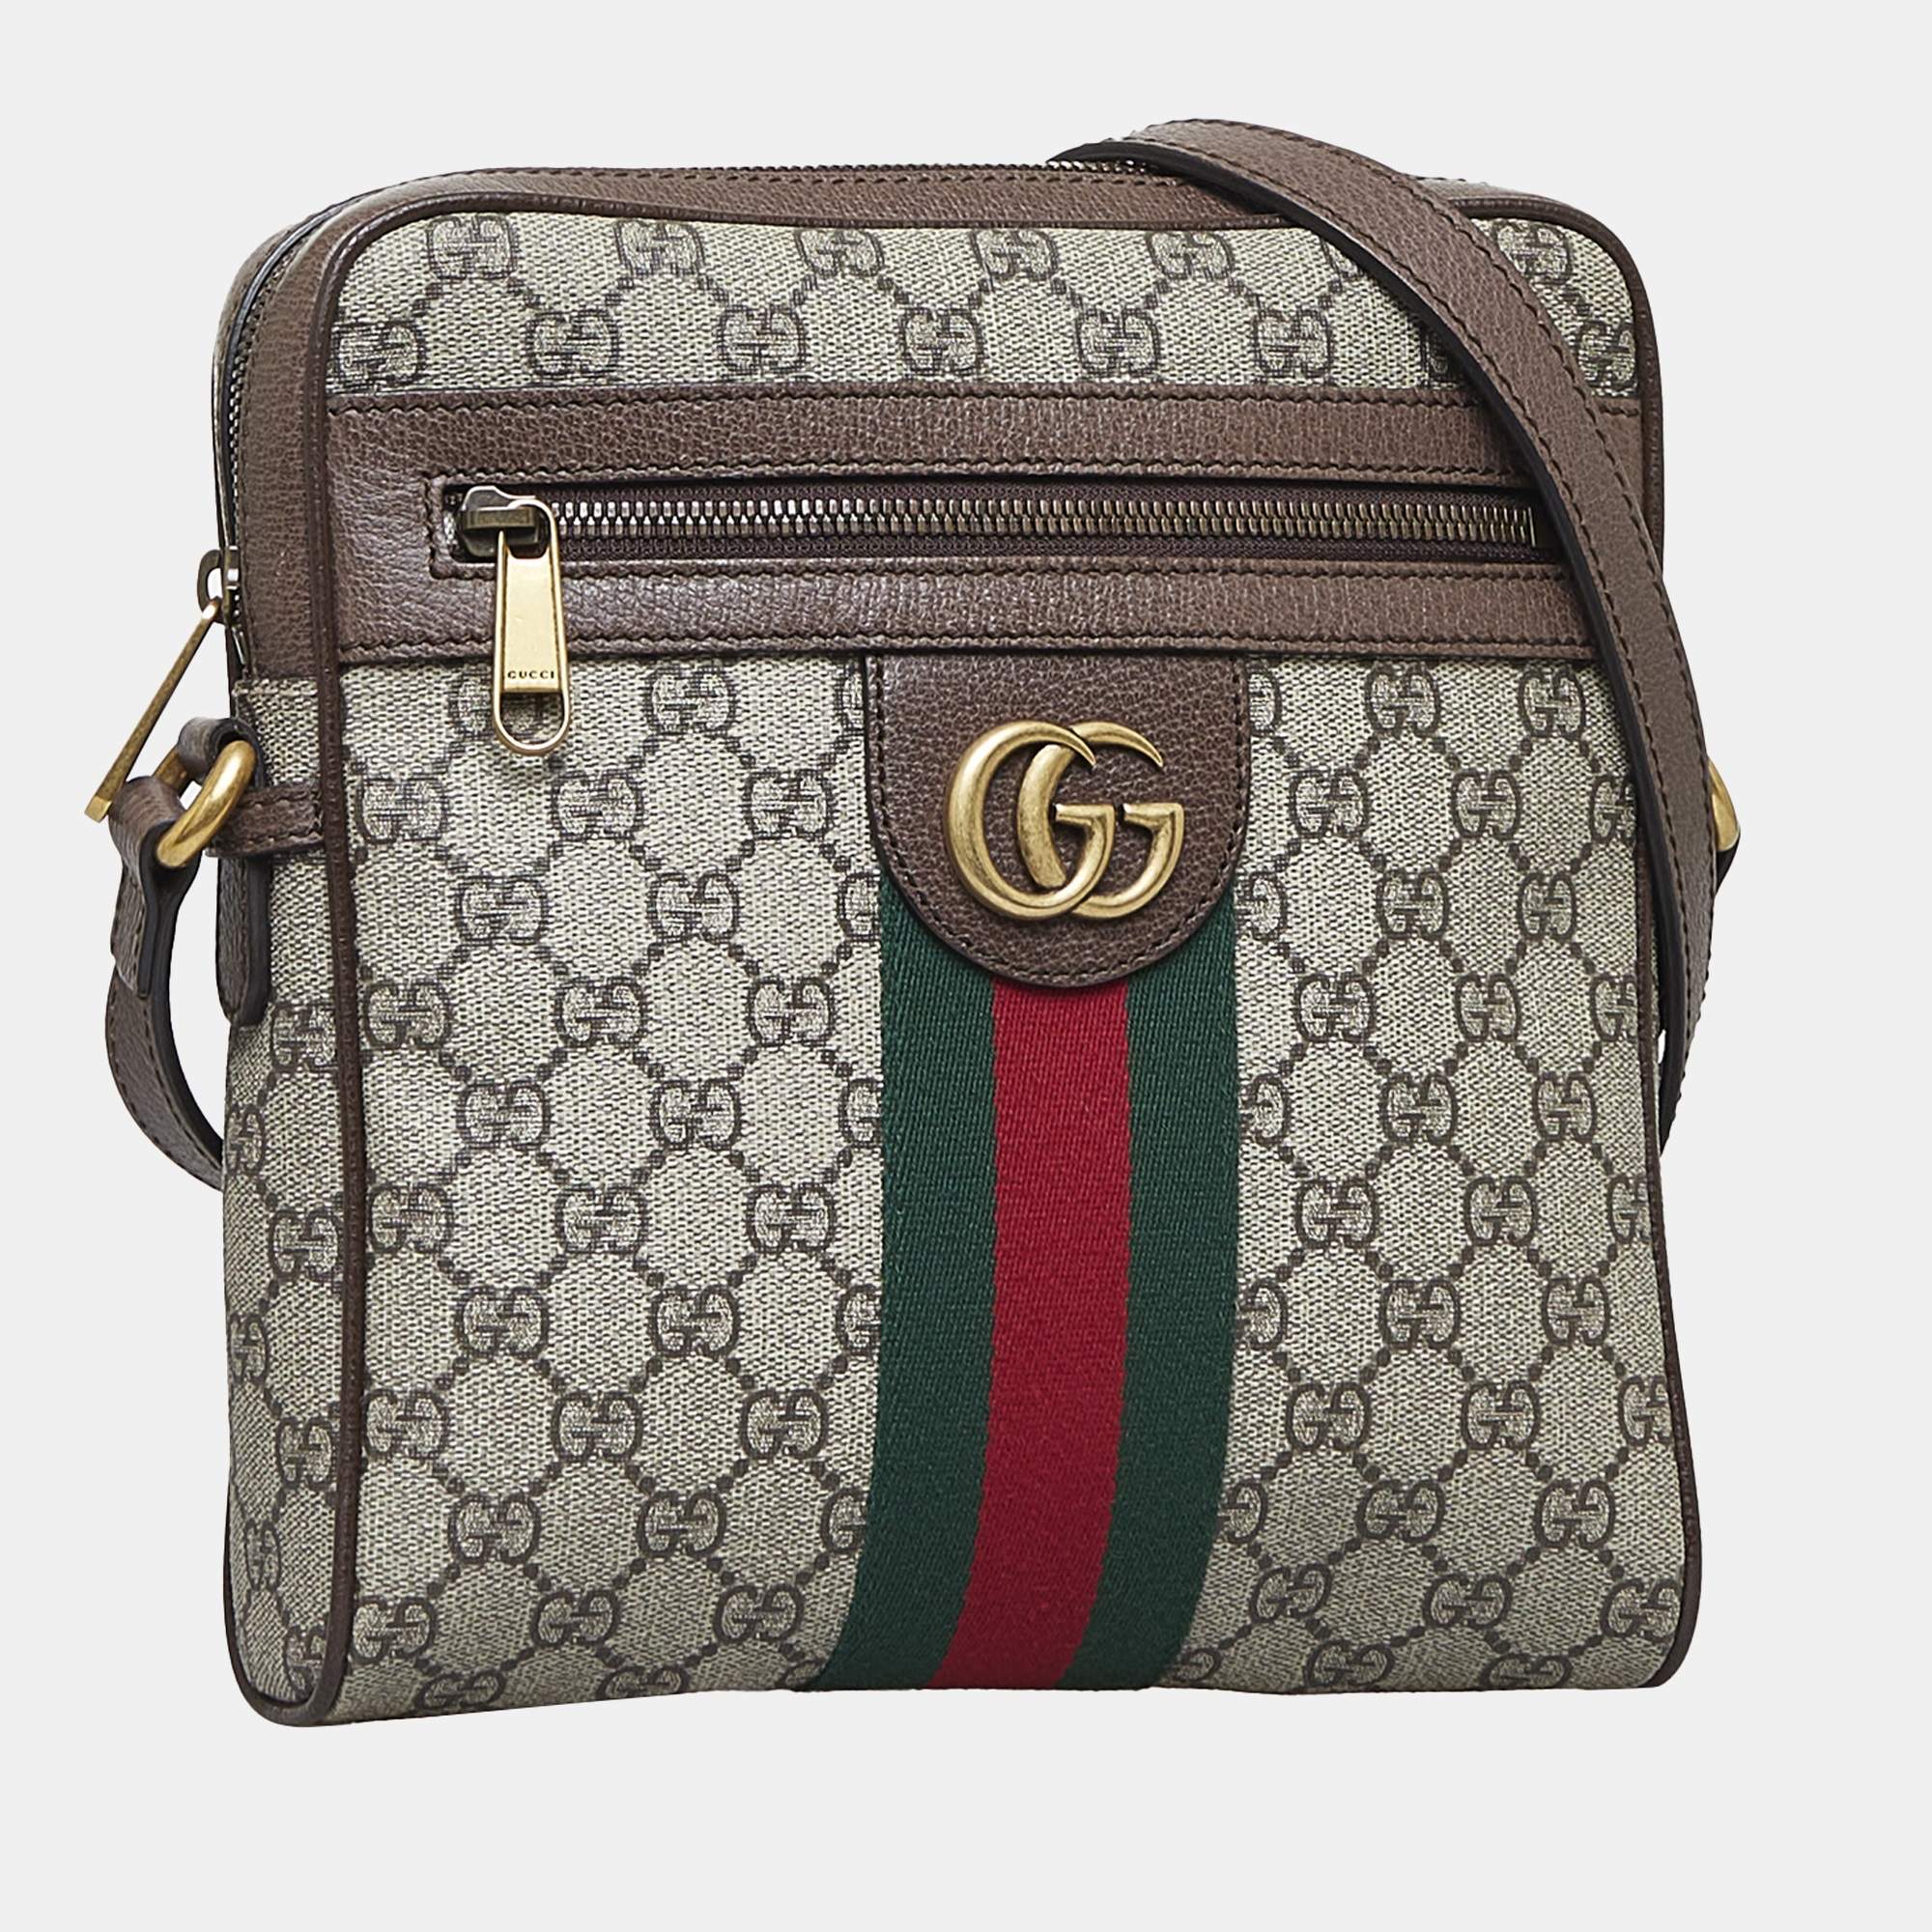 Gucci Ophidia Gg Supreme Crossbody Bag In Brown